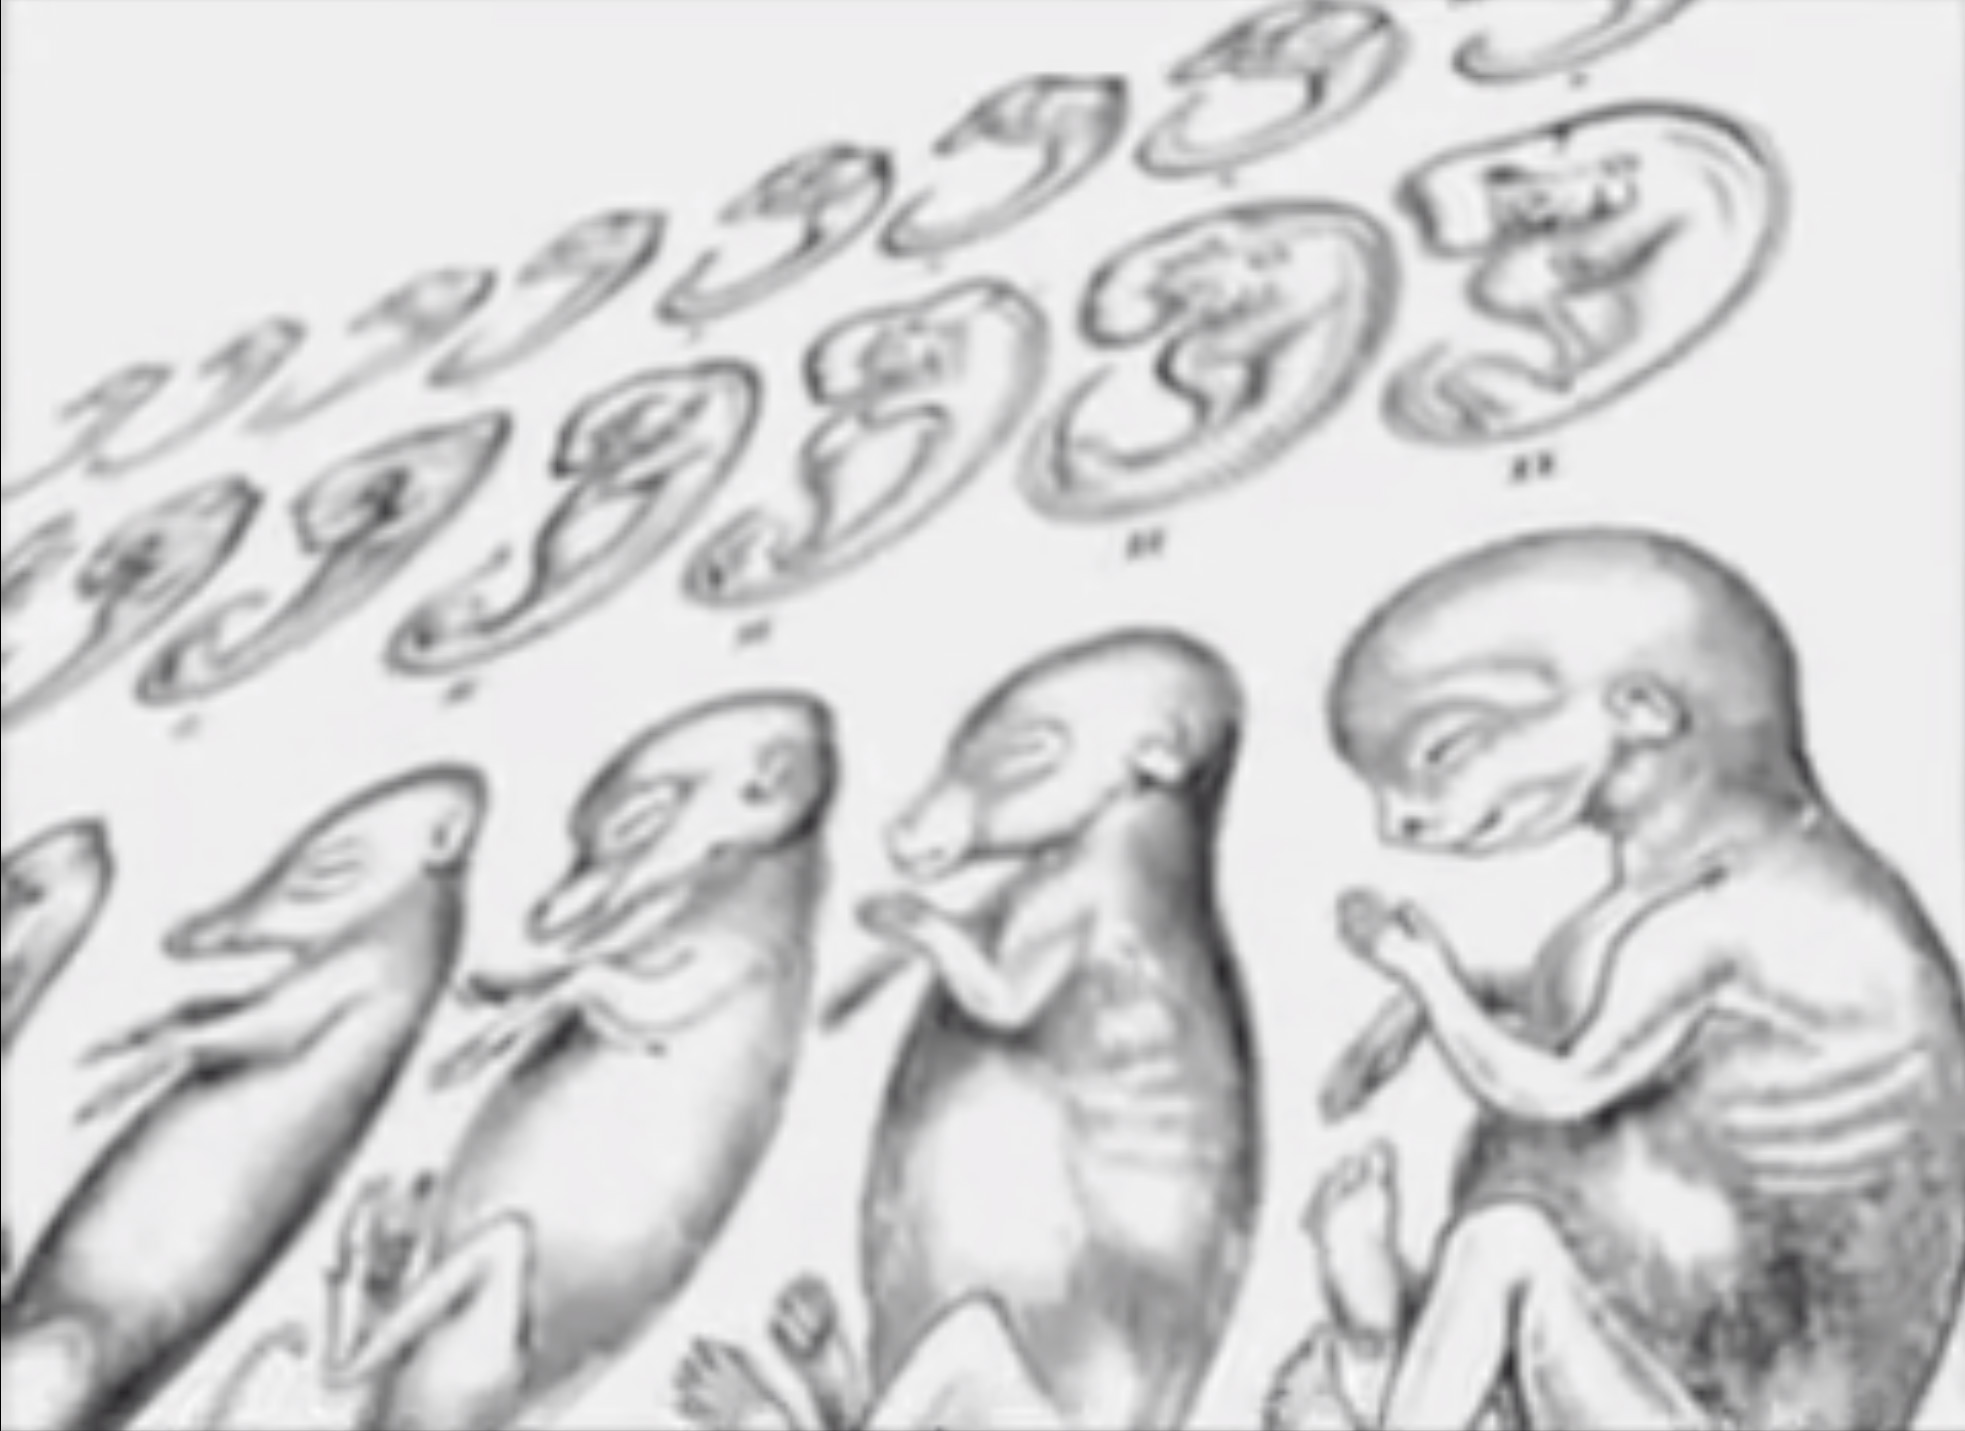 Haeckel’s Bogus Embryo Drawings Discovery Institute